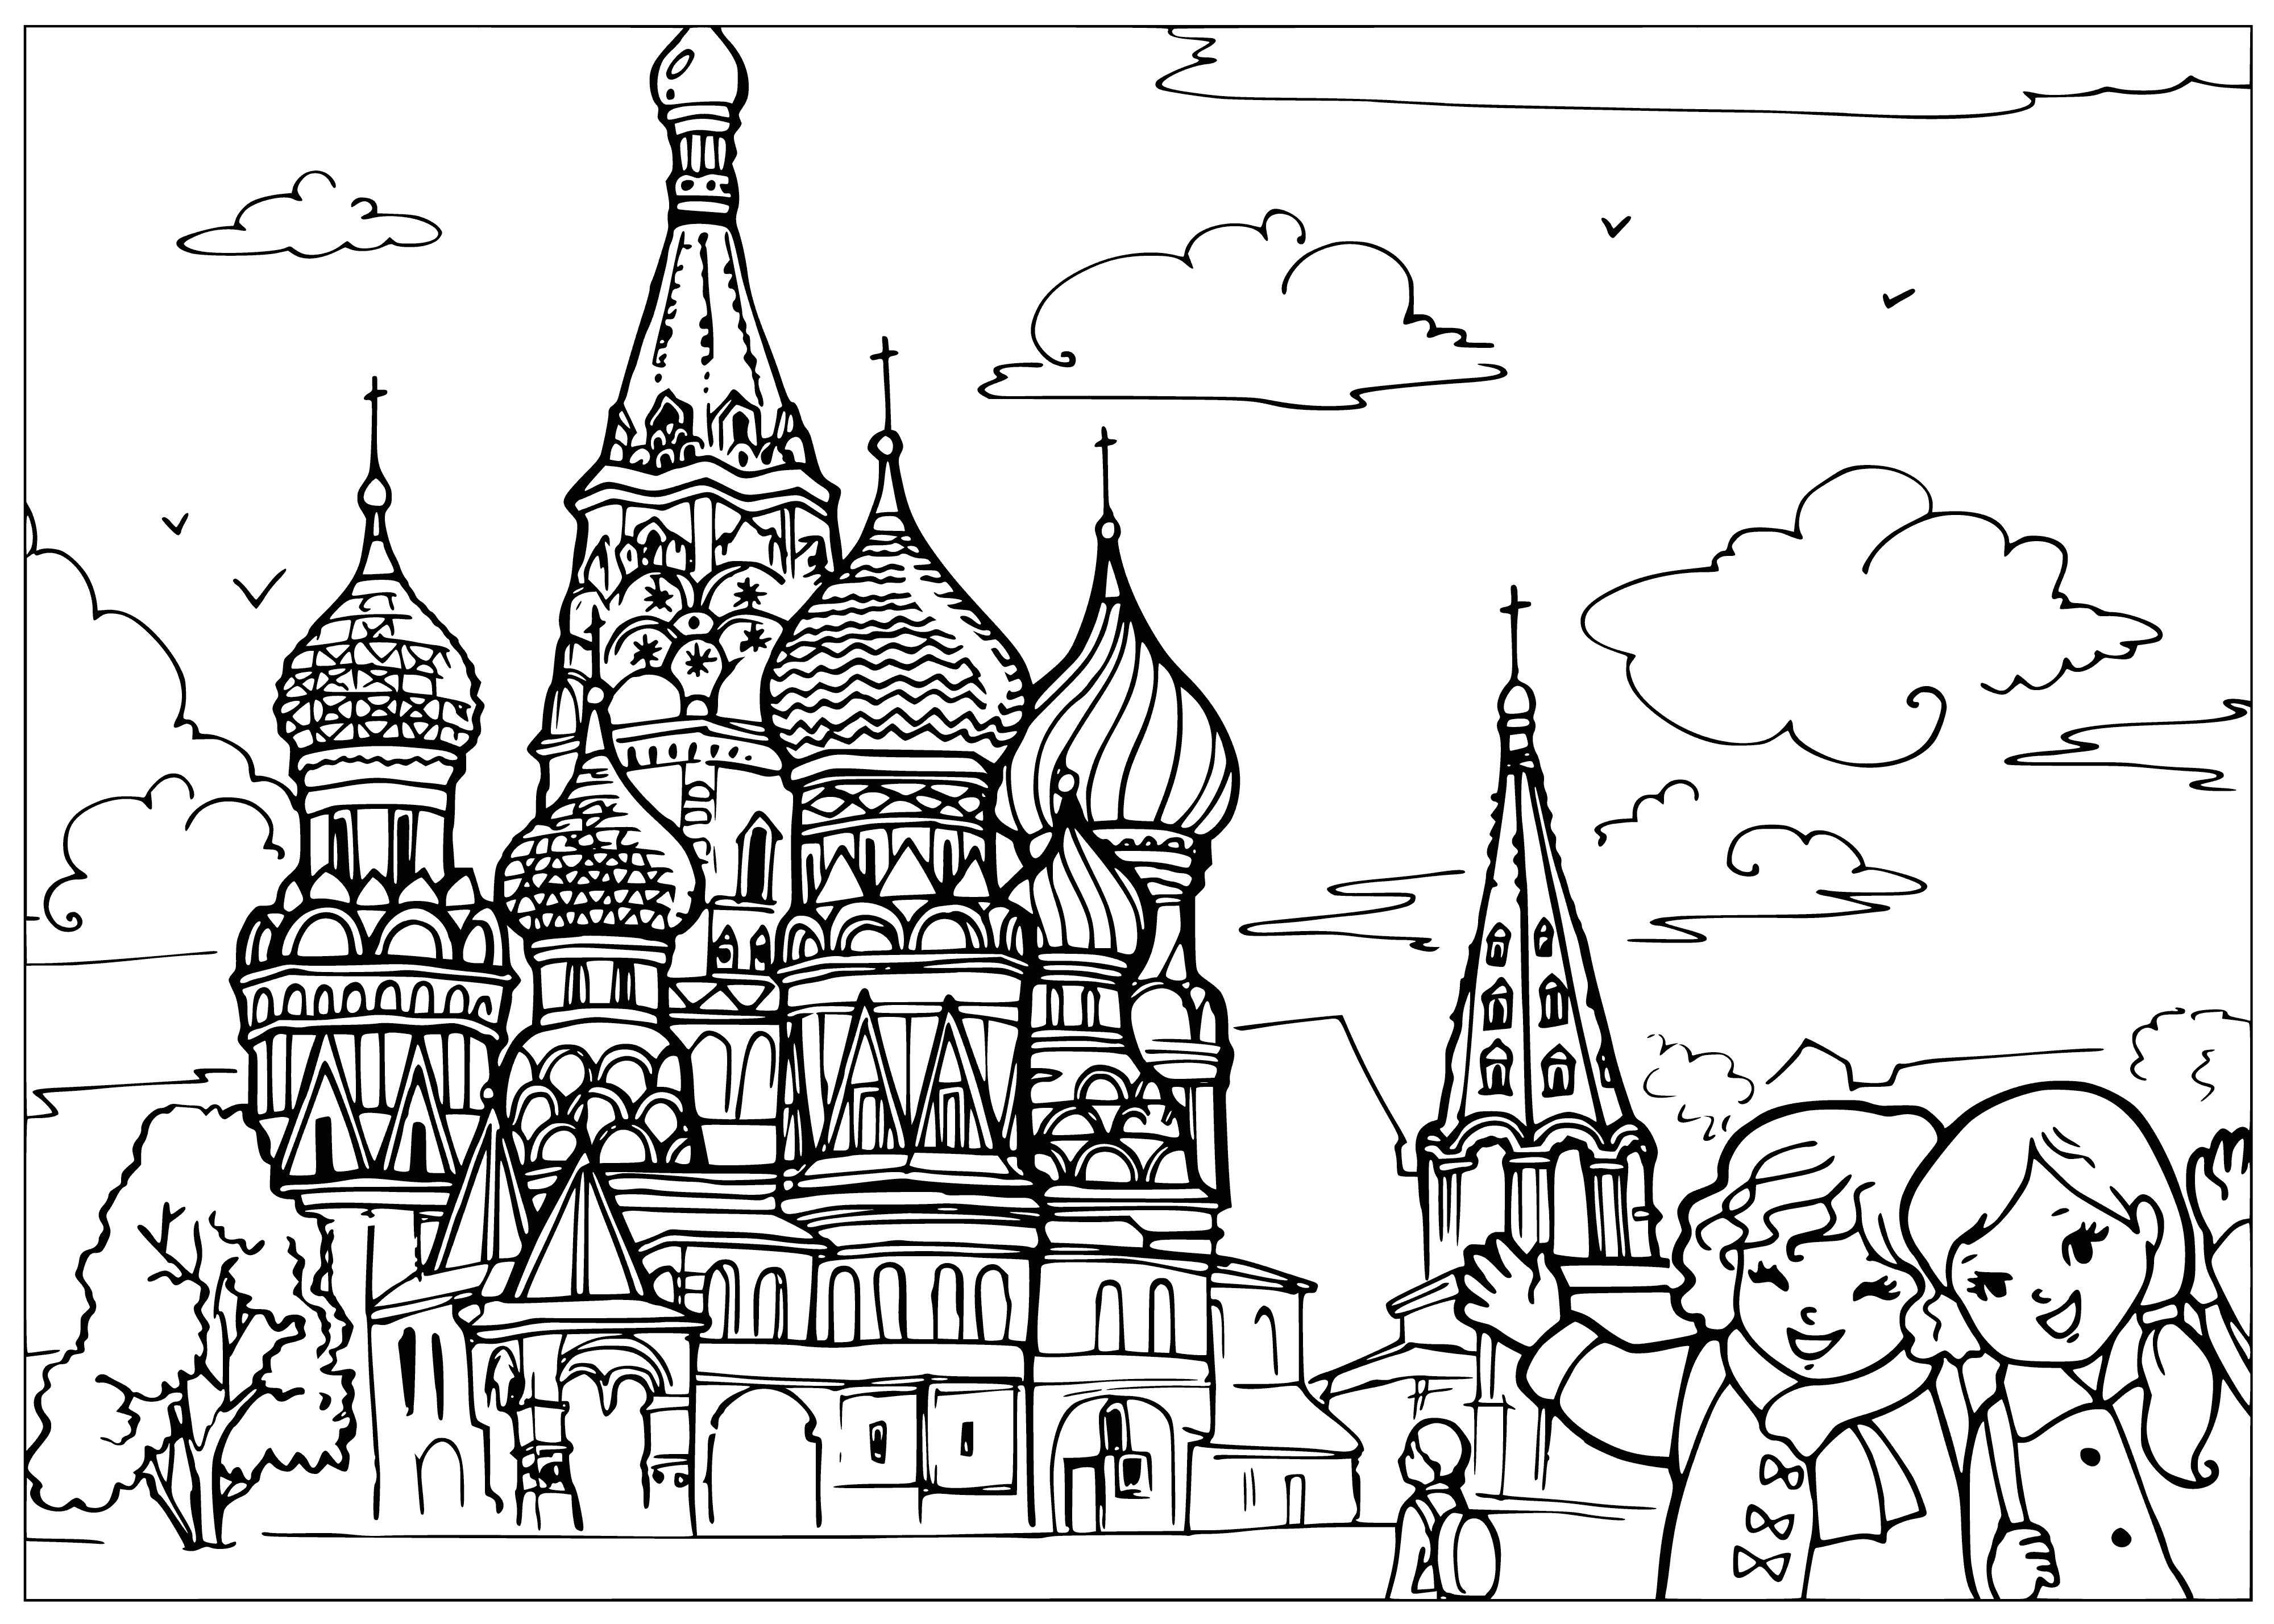 St. Basil's Cathedral in Moscow, Russia coloring page